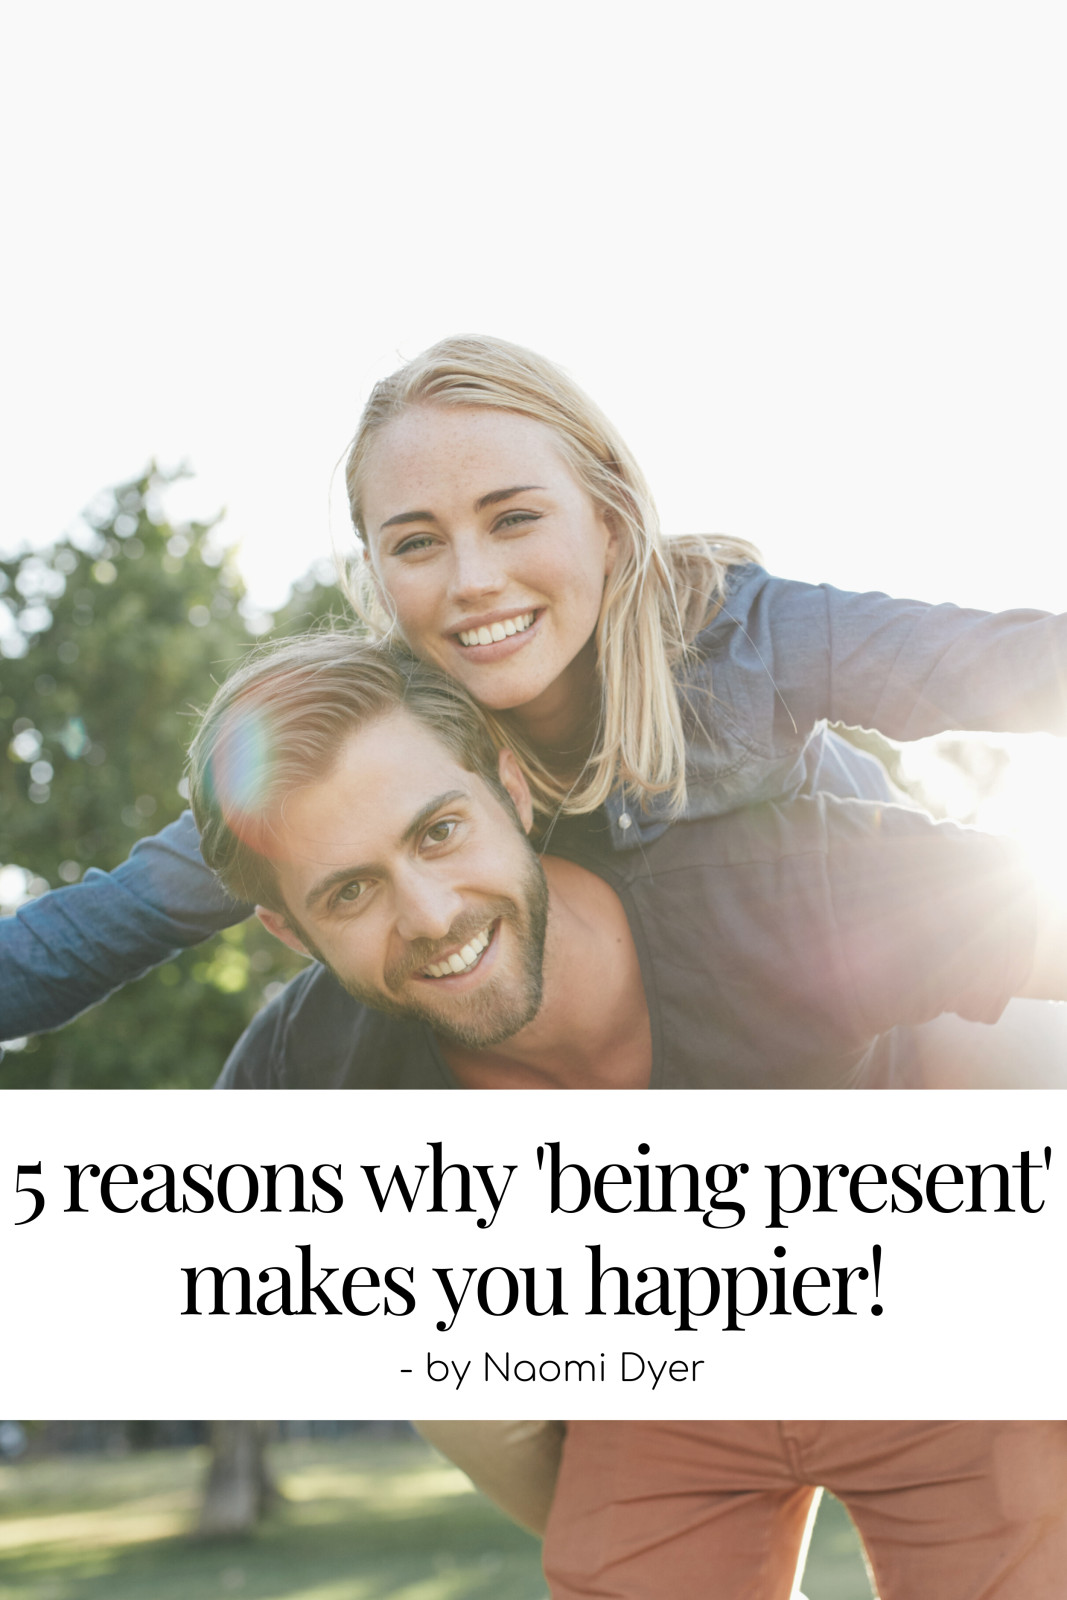 5 reasons why being present makes YOU happier!